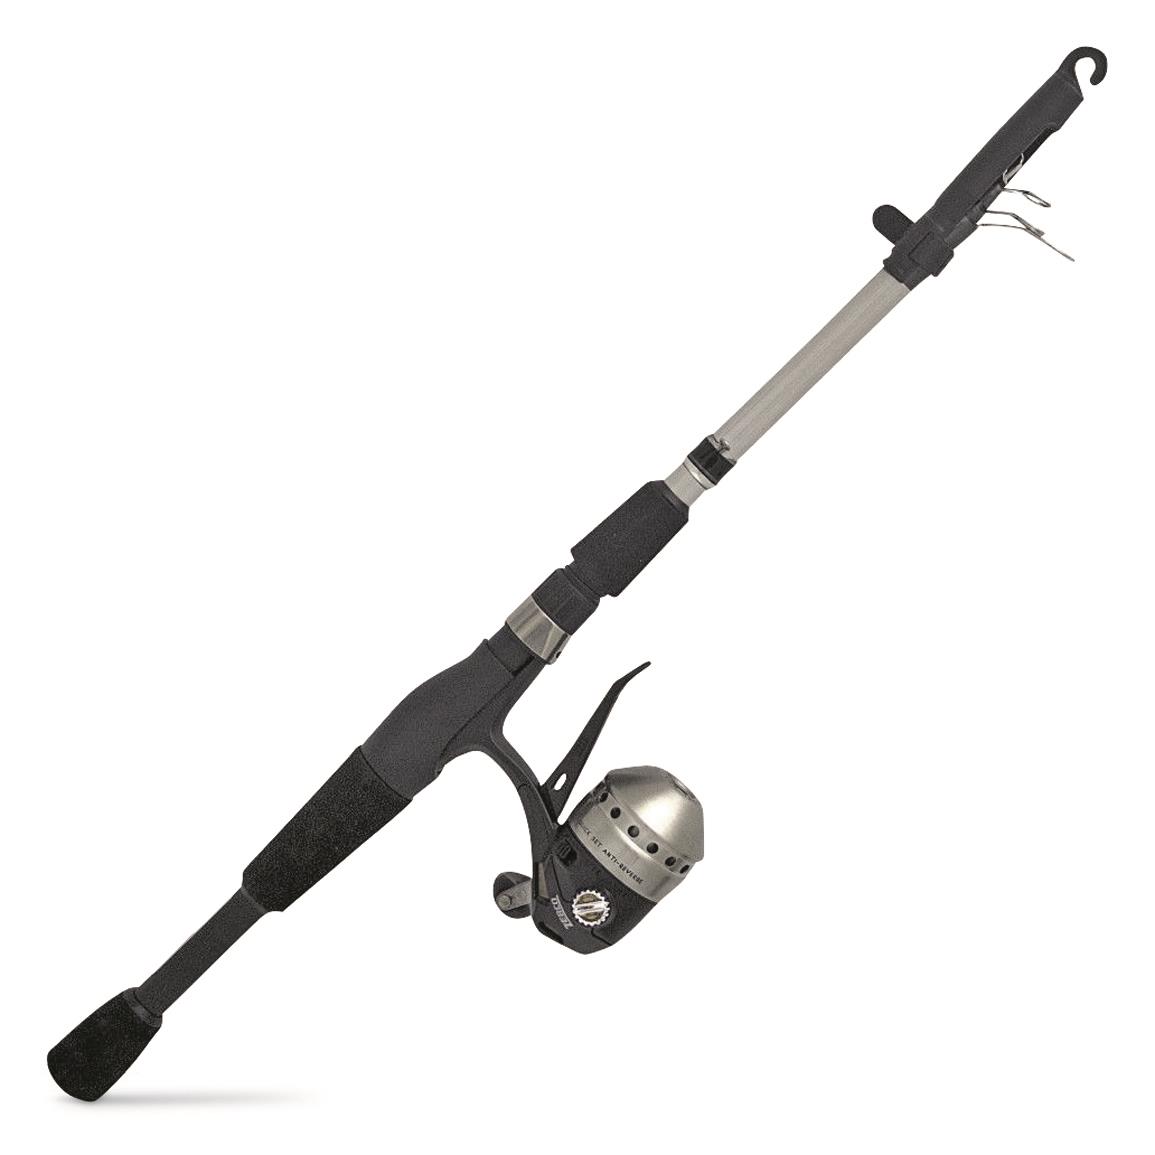 Zebco 33 Micro Trigger Telecast Rod and Reel Fishing Combo